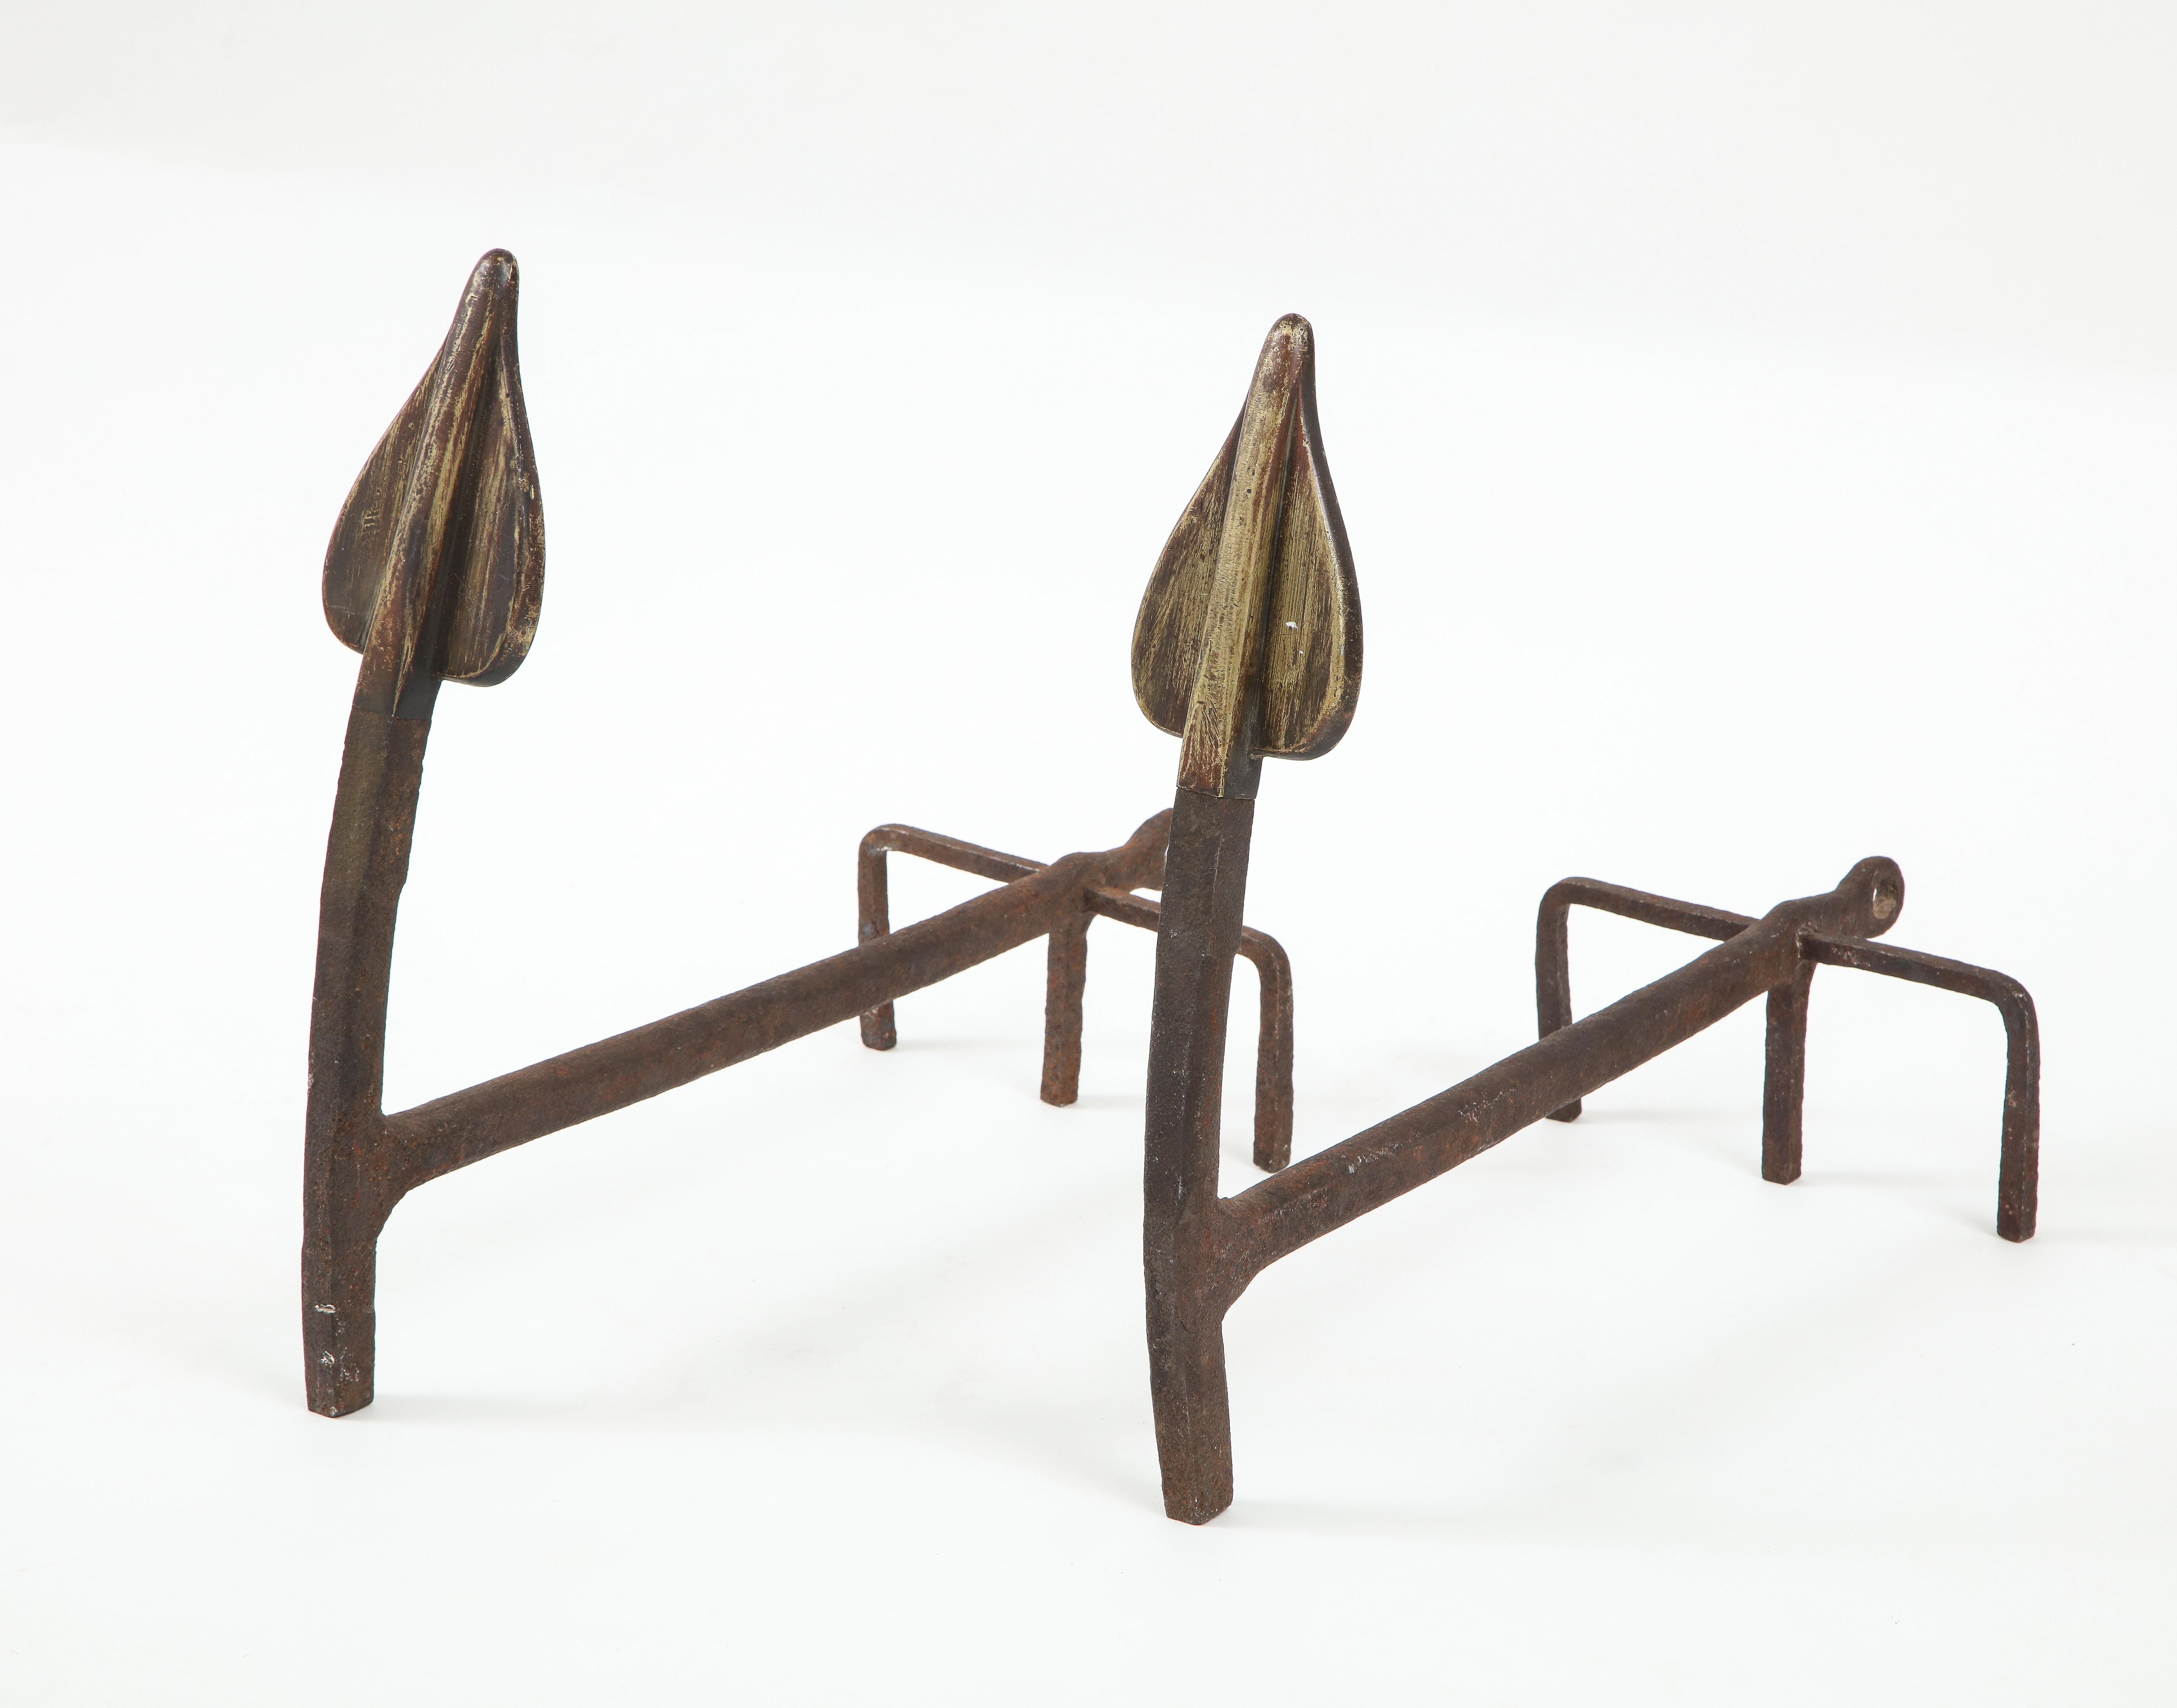 A pair modernist handwrought fireplace Andirons. These gently bent arrows that are artisan crafted fireplace pieces are forged in wrought iron.